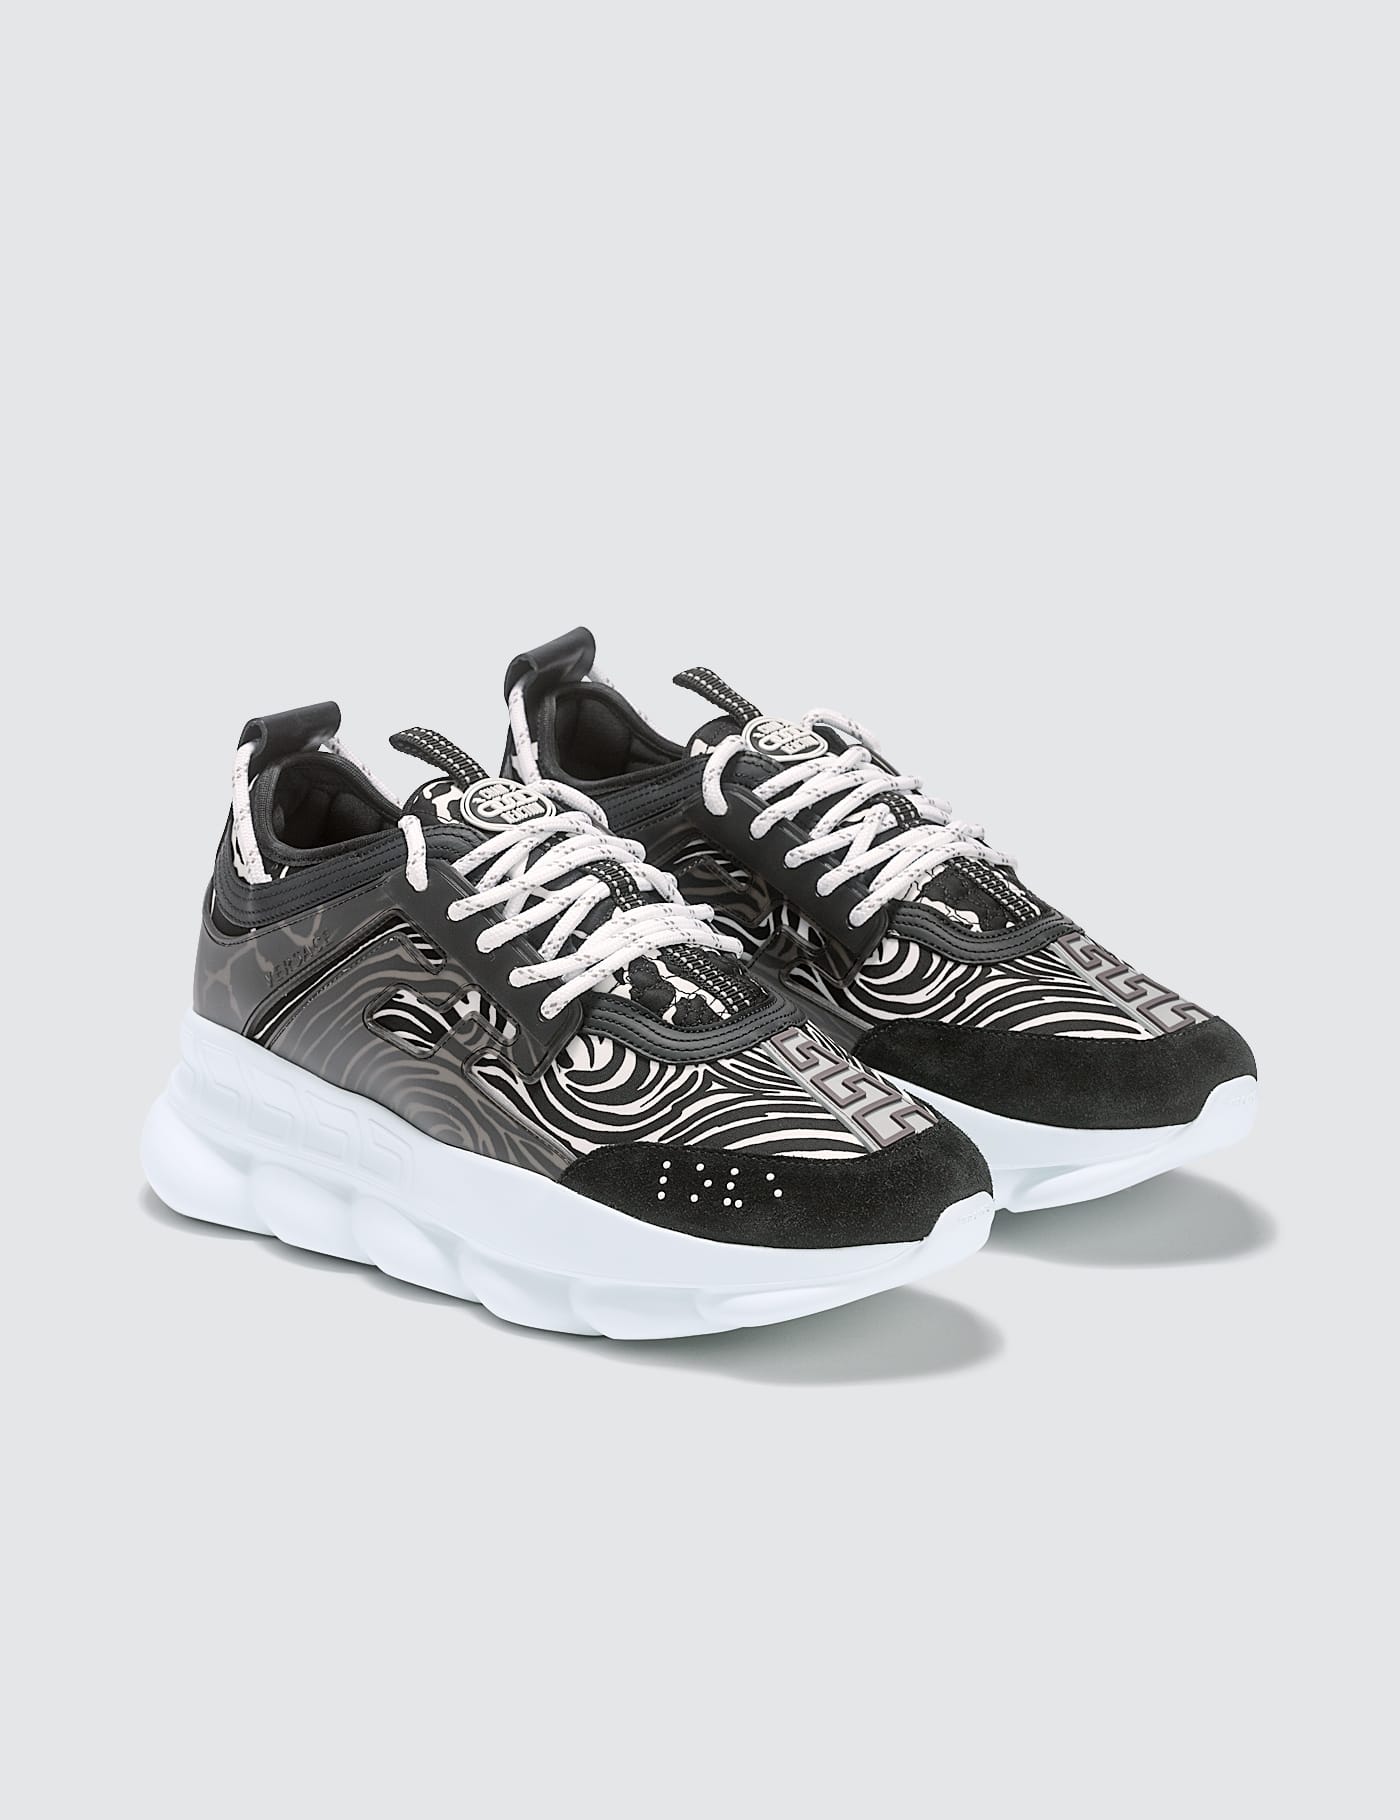 versace chain reaction sneakers cheap